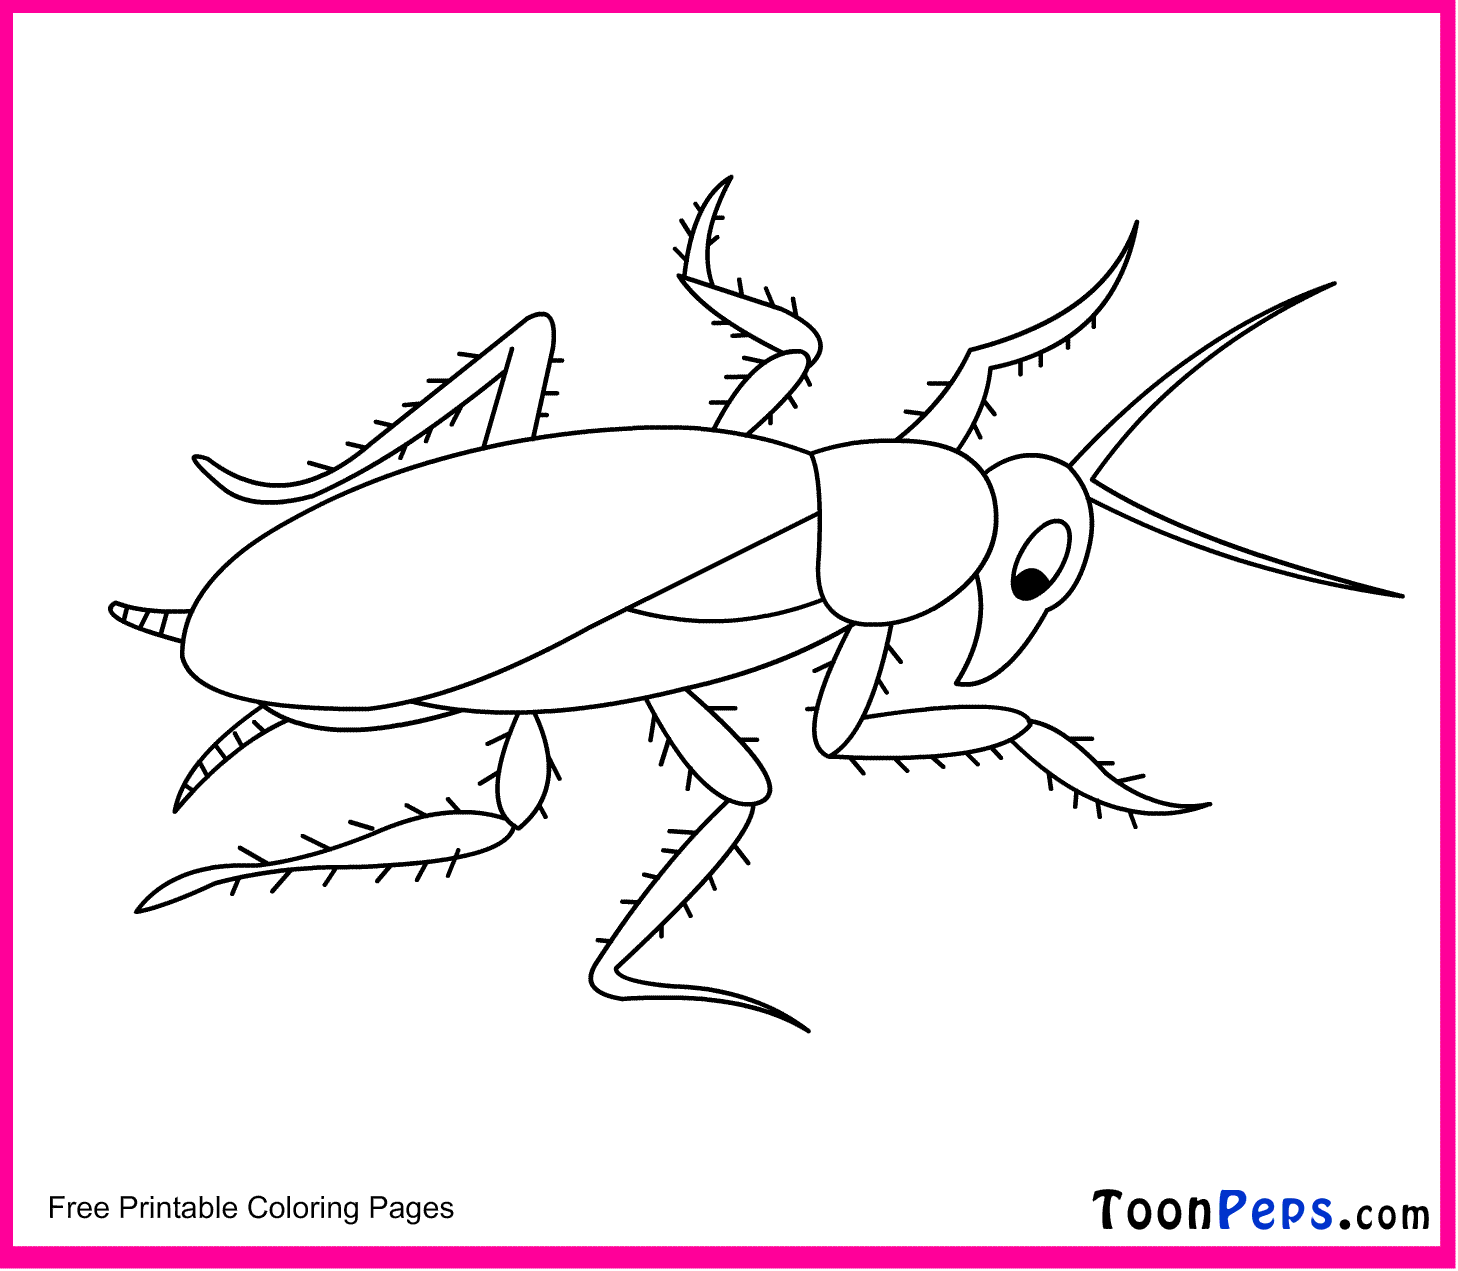 Cockroach Coloring Pages - Kidsuki